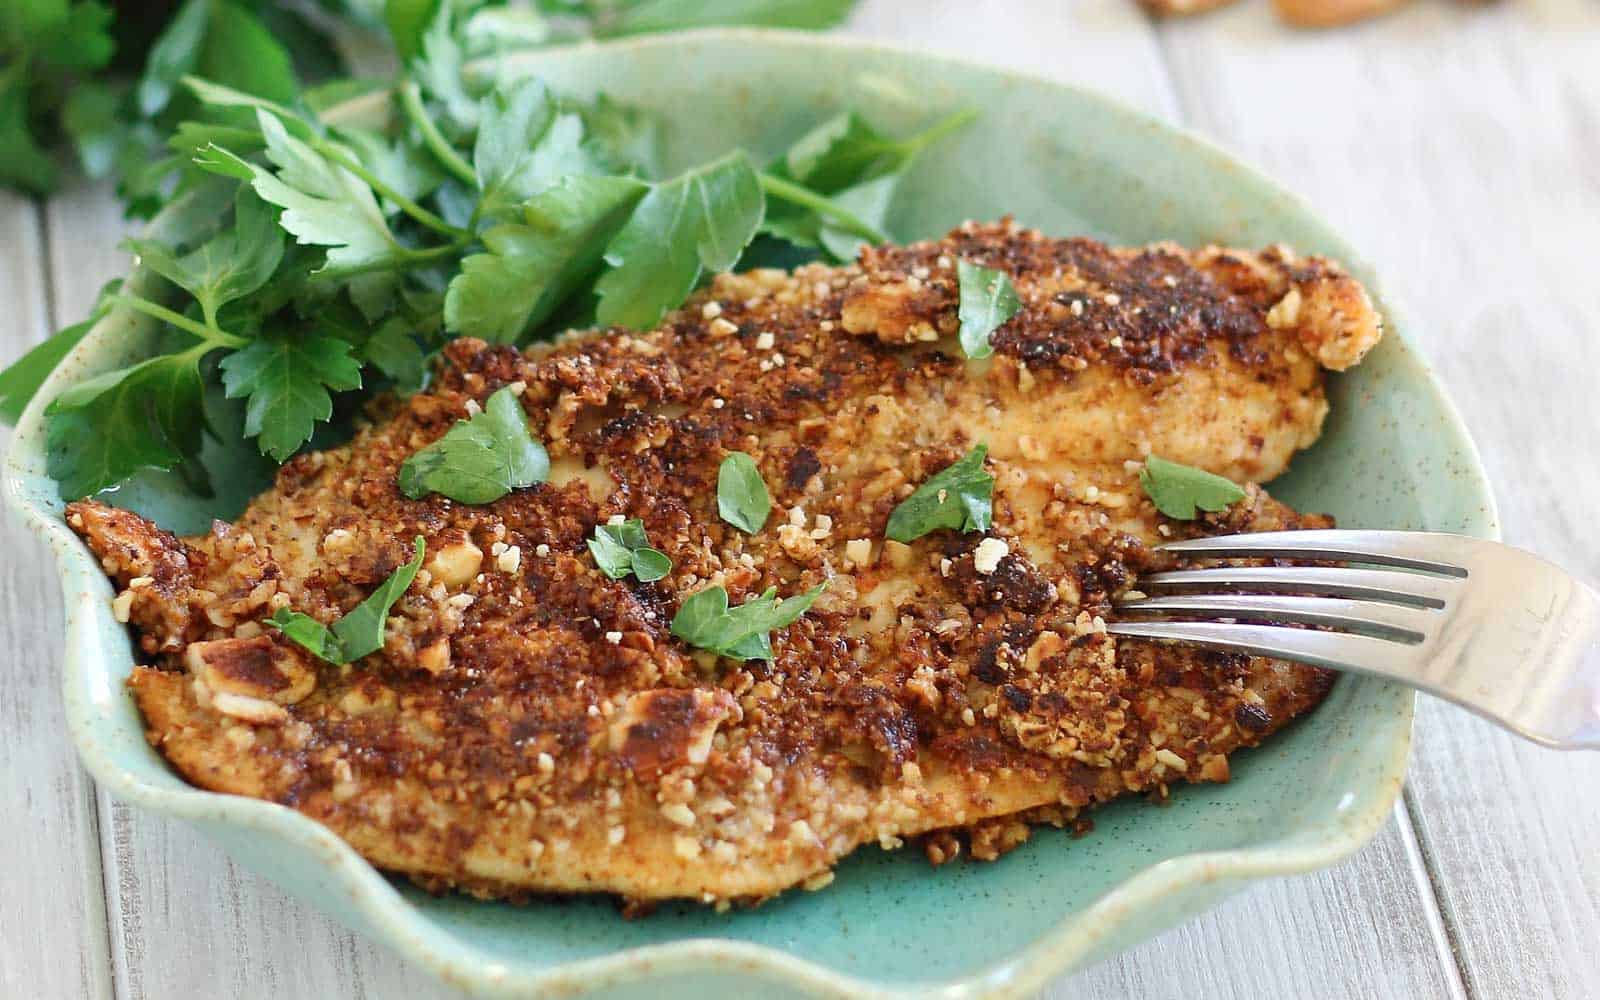 Almond crusted tilapia with fresh herbs.